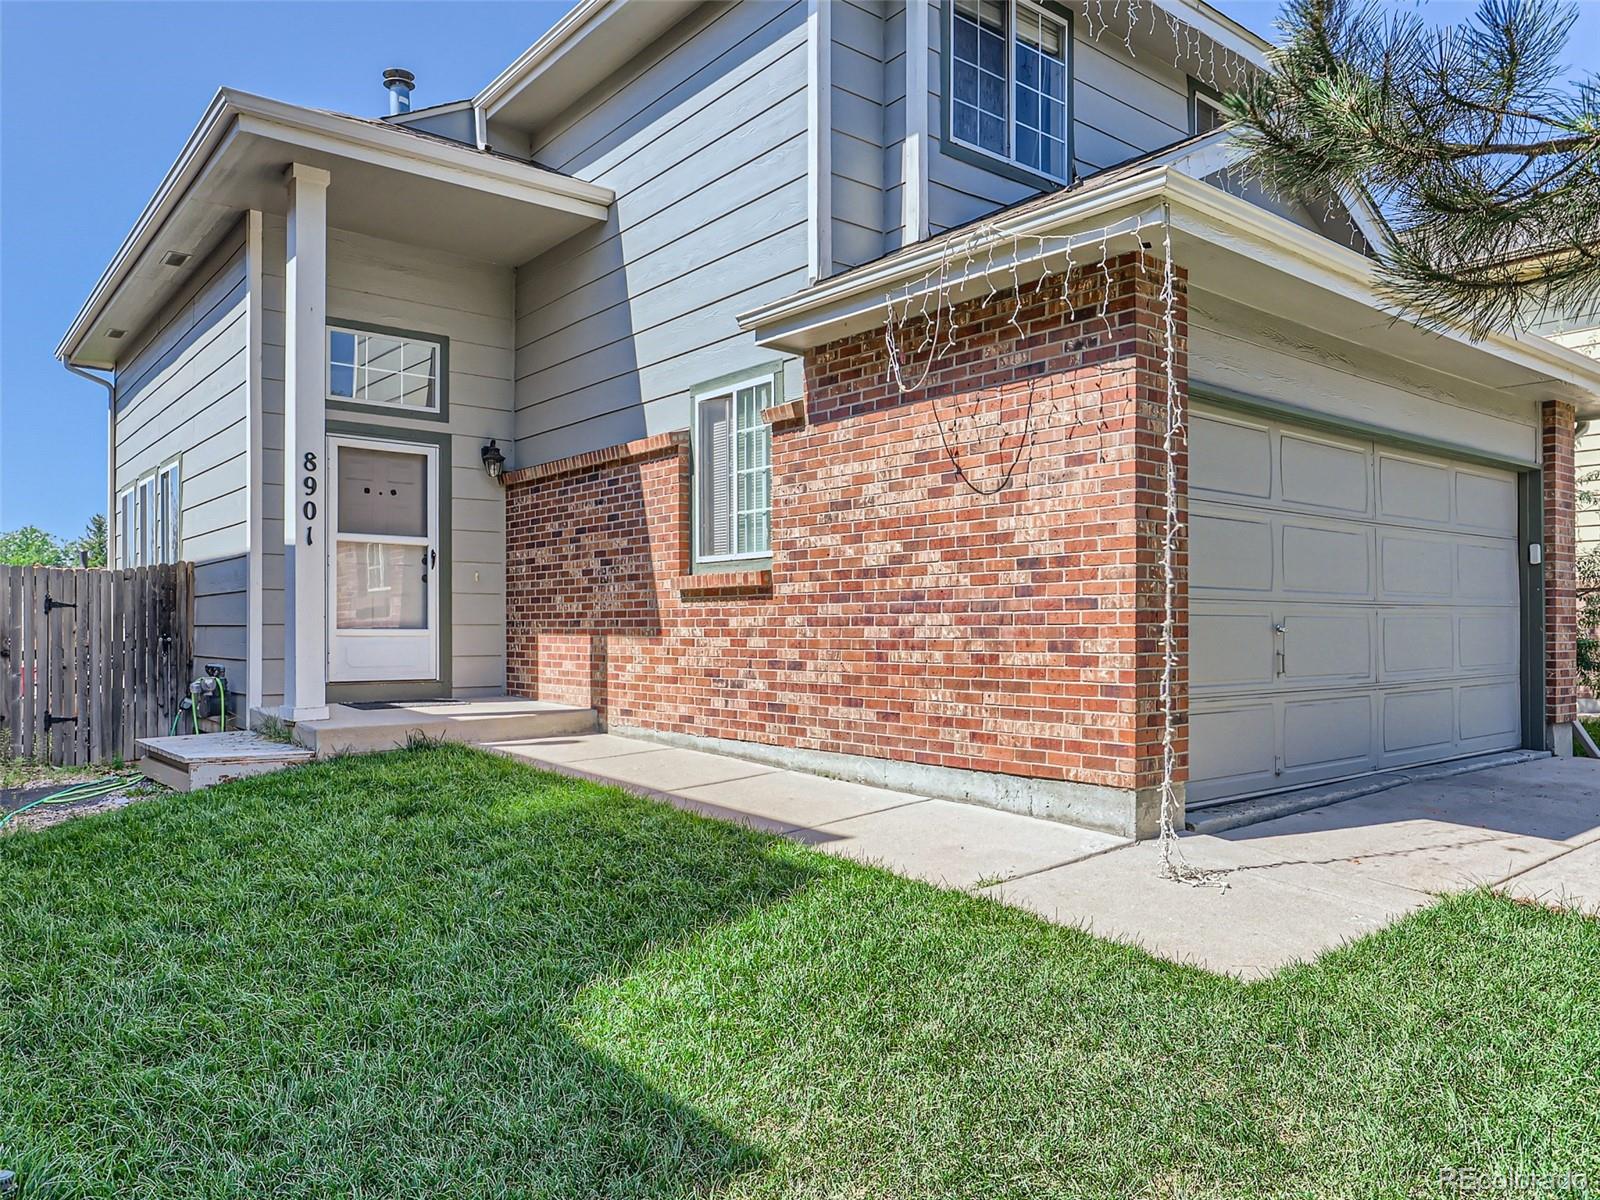 8901  cloverleaf circle, Parker sold home. Closed on 2024-03-29 for $477,000.